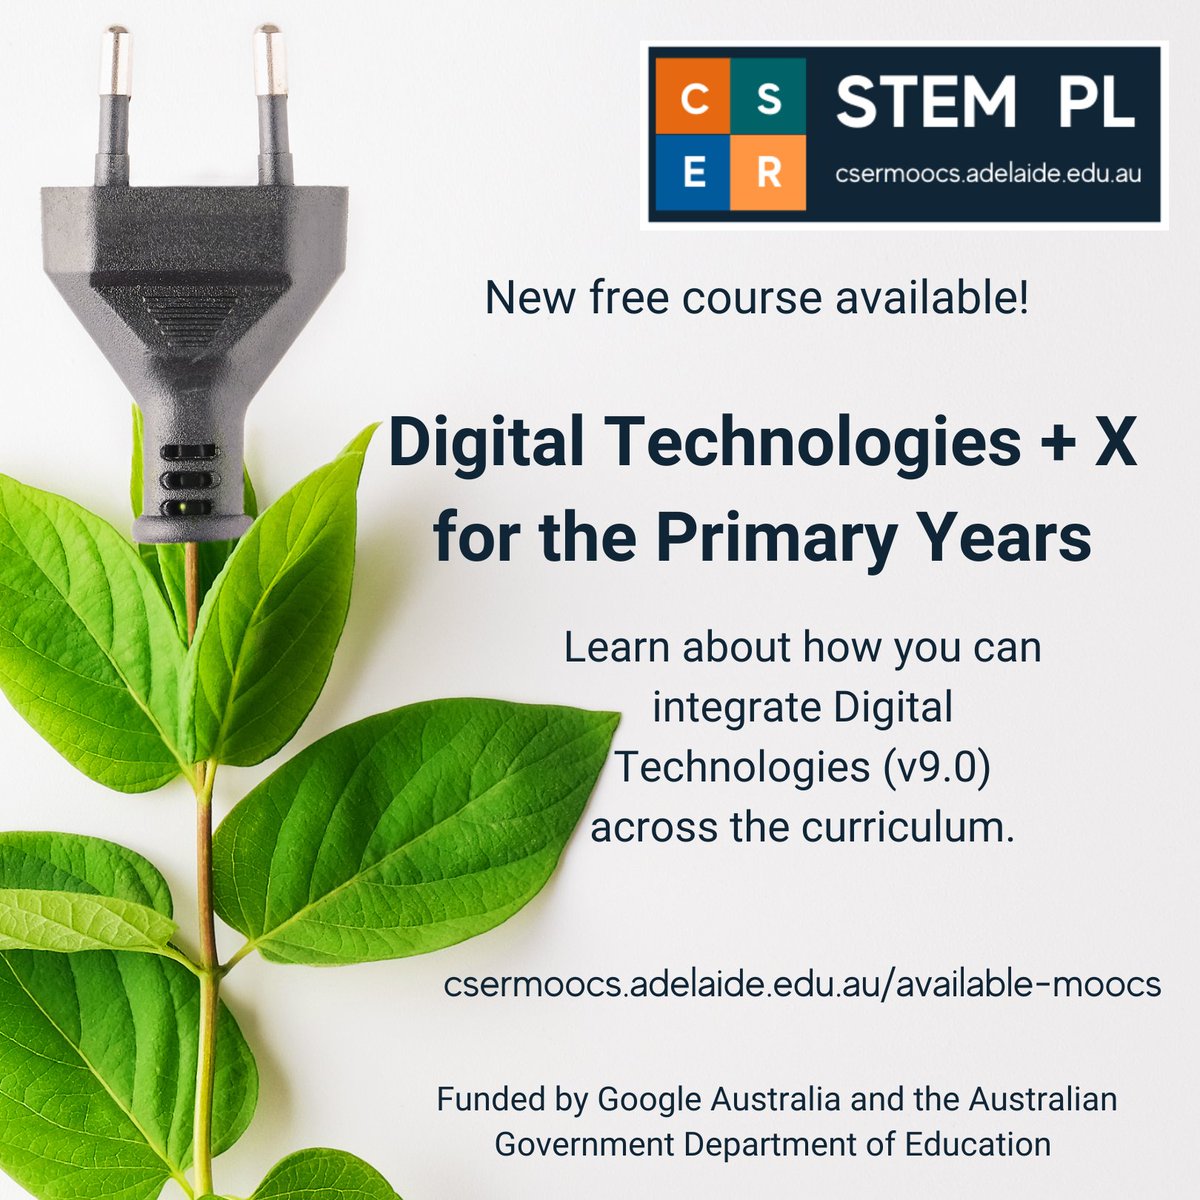 Have you seen our new free online course? Digital Technologies + X for the Primary Years. Enrol free now via bit.ly/DTplusX_MOOC #DigitalTechnologies + #Sustainability + #English + #Maths #csermoocs #edtech #Aboriginal&TorresStraitIslander #Histories&Cultures #CCP